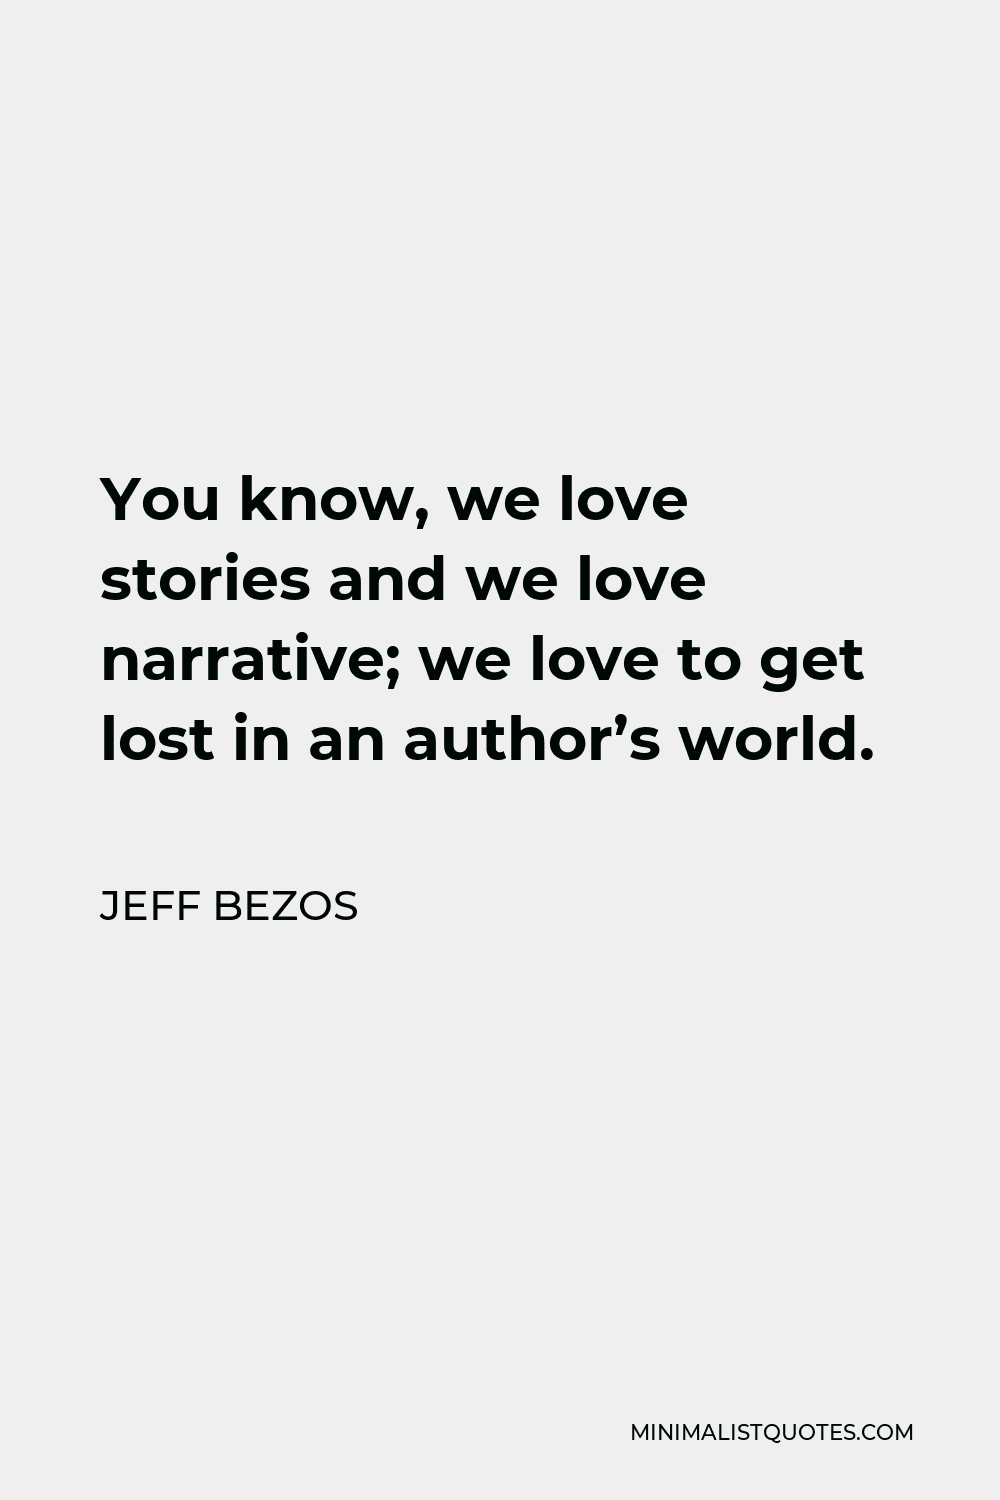 Jeff Bezos Quote - You know, we love stories and we love narrative; we love to get lost in an author’s world.